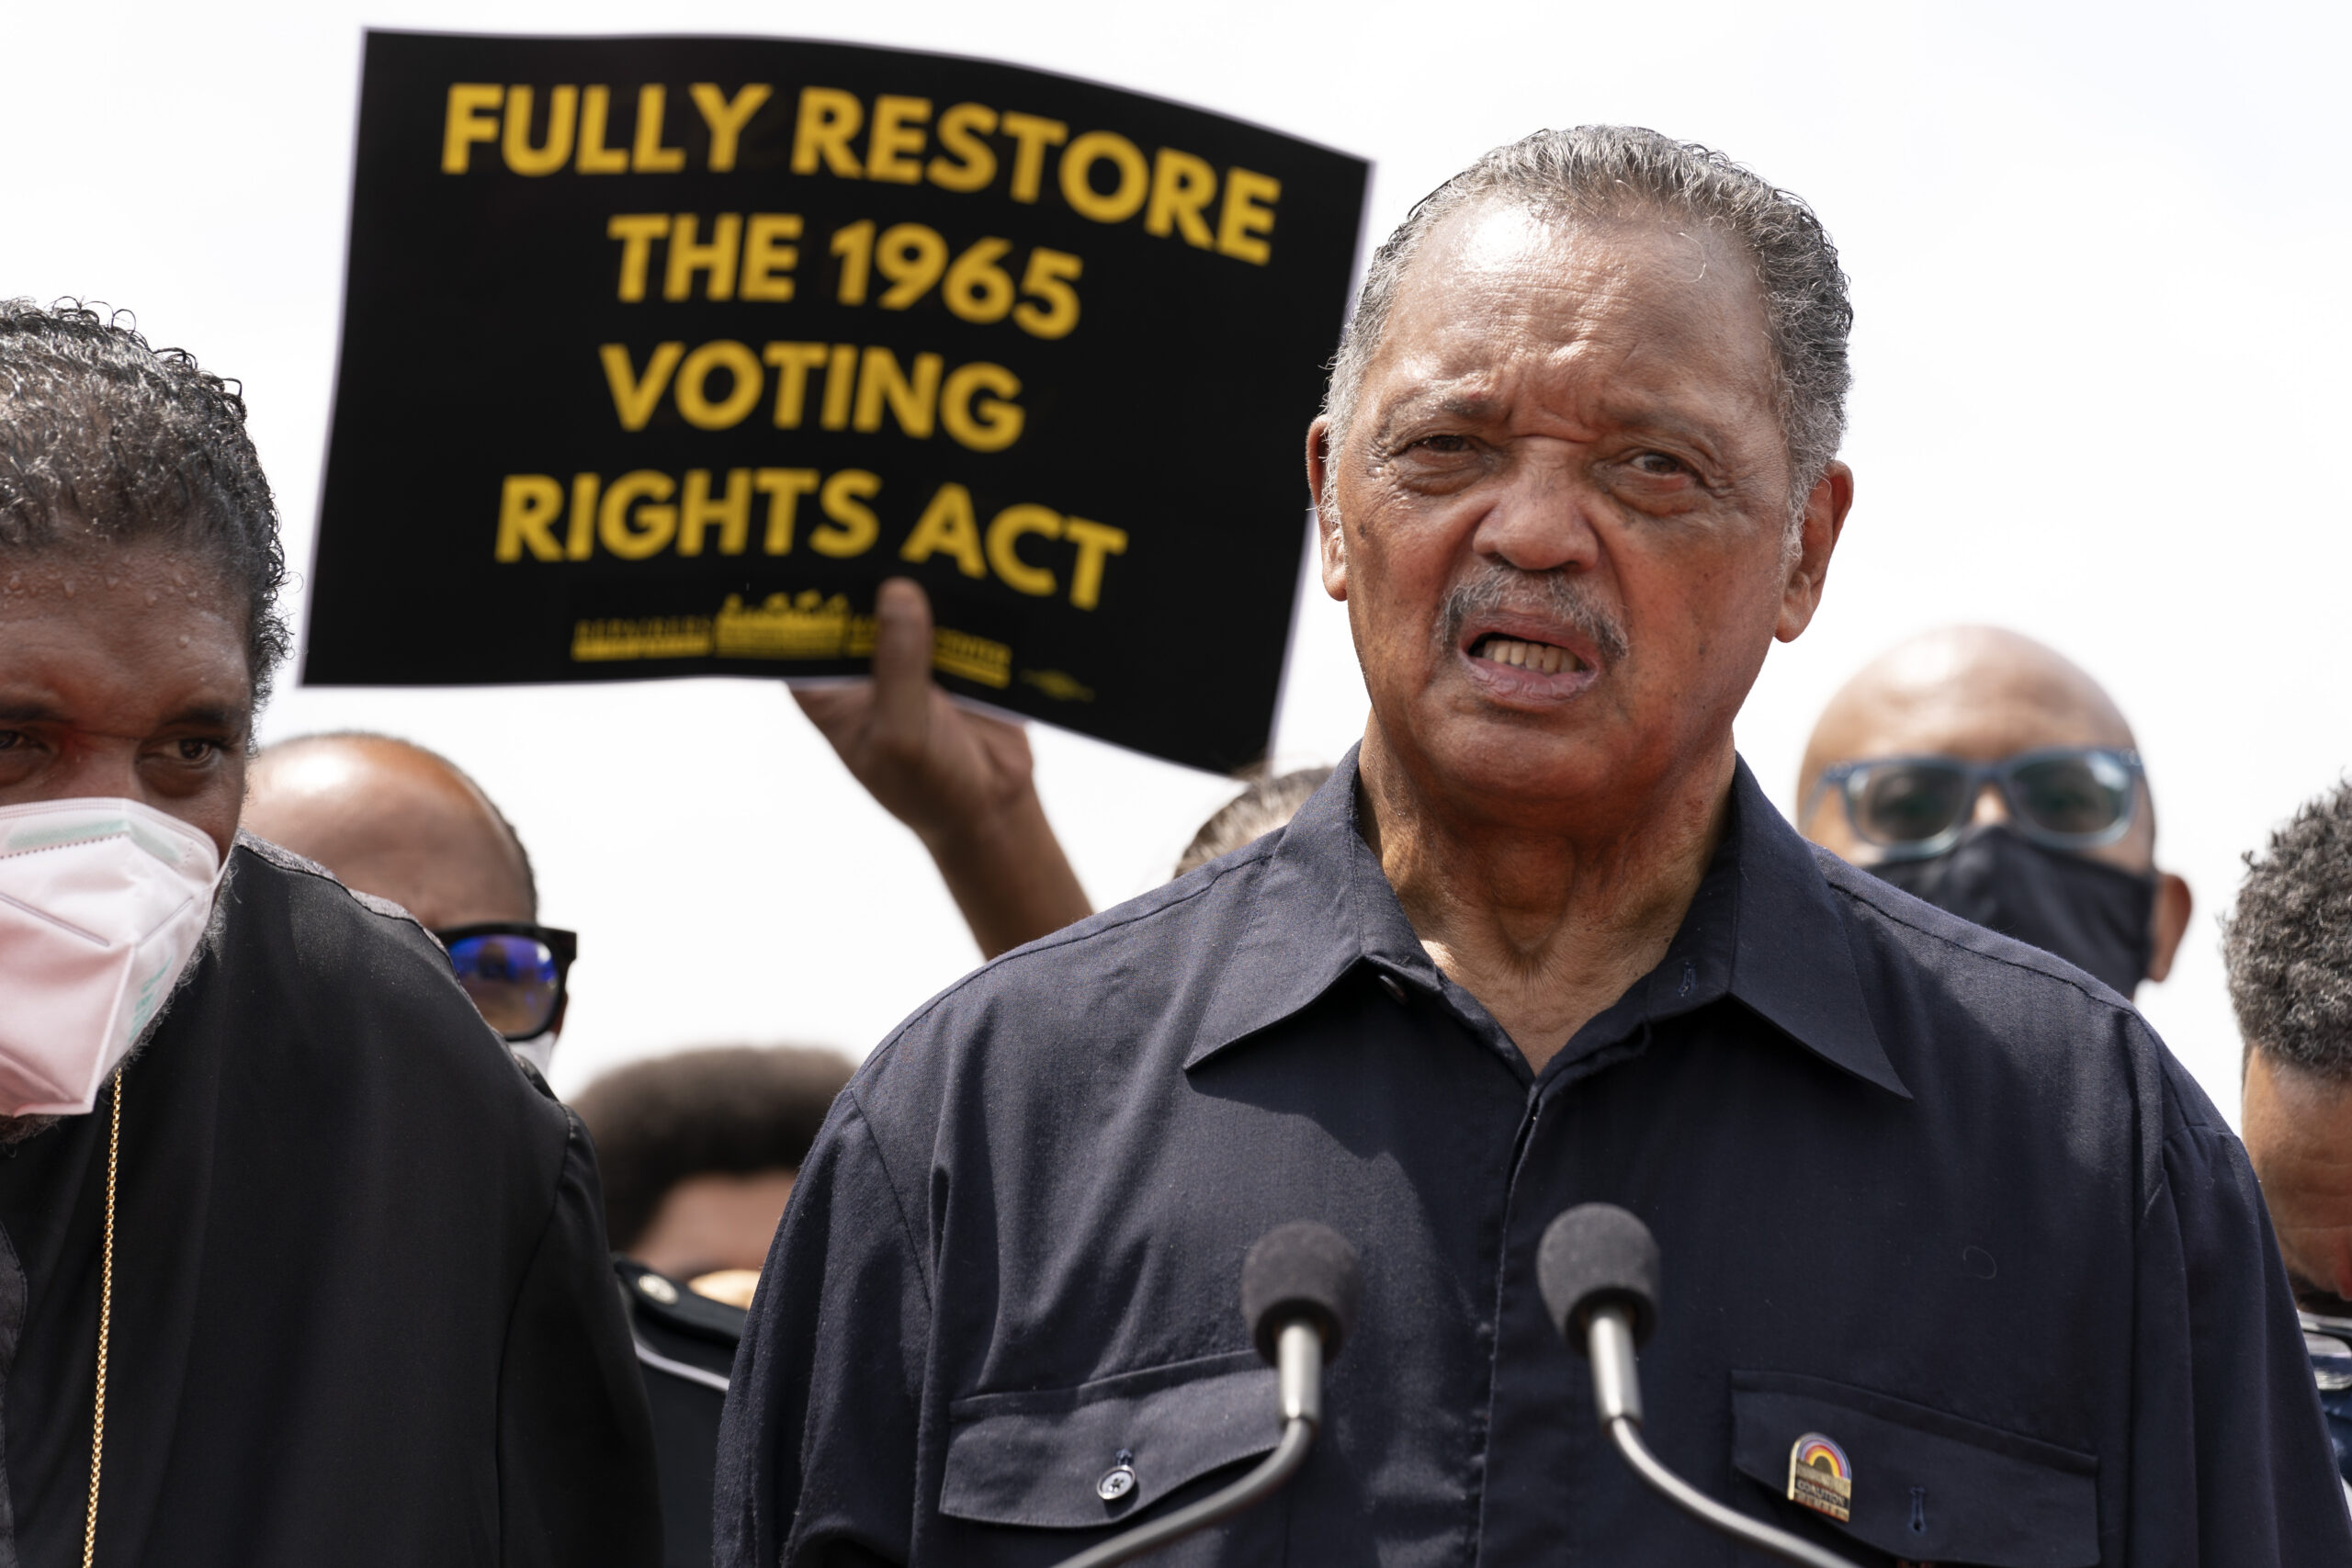 FILE - In this Monday, Aug. 2, 2021 file photo, Rev. Jesse Jackson speaks to the crowd during a demonstration supporting the voting rights, on Capitol Hill, in Washington. The Rev. Jesse Jackson and his wife, Jacqueline, have been hospitalized after testing positive for COVID-19 according to a statement Saturday, Aug. 21, 2021. He is vaccinated against the virus and publicly received his first dose in January. According to a statement released Saturday evening, the Jacksons are being treated at Northwestern Memorial Hospital in Chicago. He is 79 years old. Jacqueline Jackson is 77. (AP Photo/Jose Luis Magana, File)